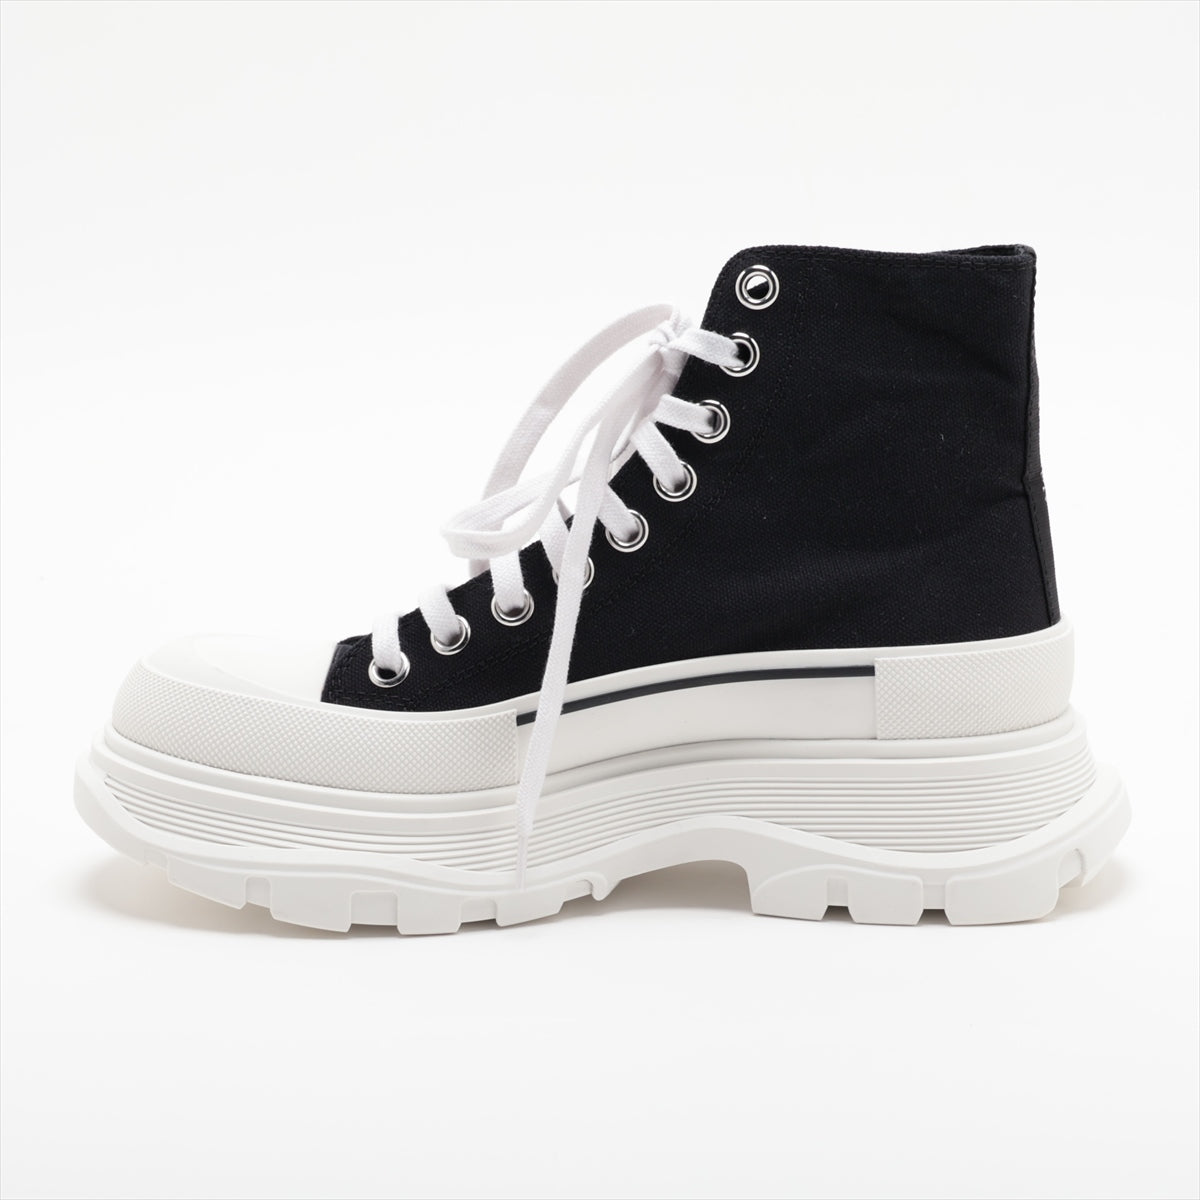 Alexander McQueen canvas High-top Sneakers 38 Ladies' Black 697080 Is there a replacement string